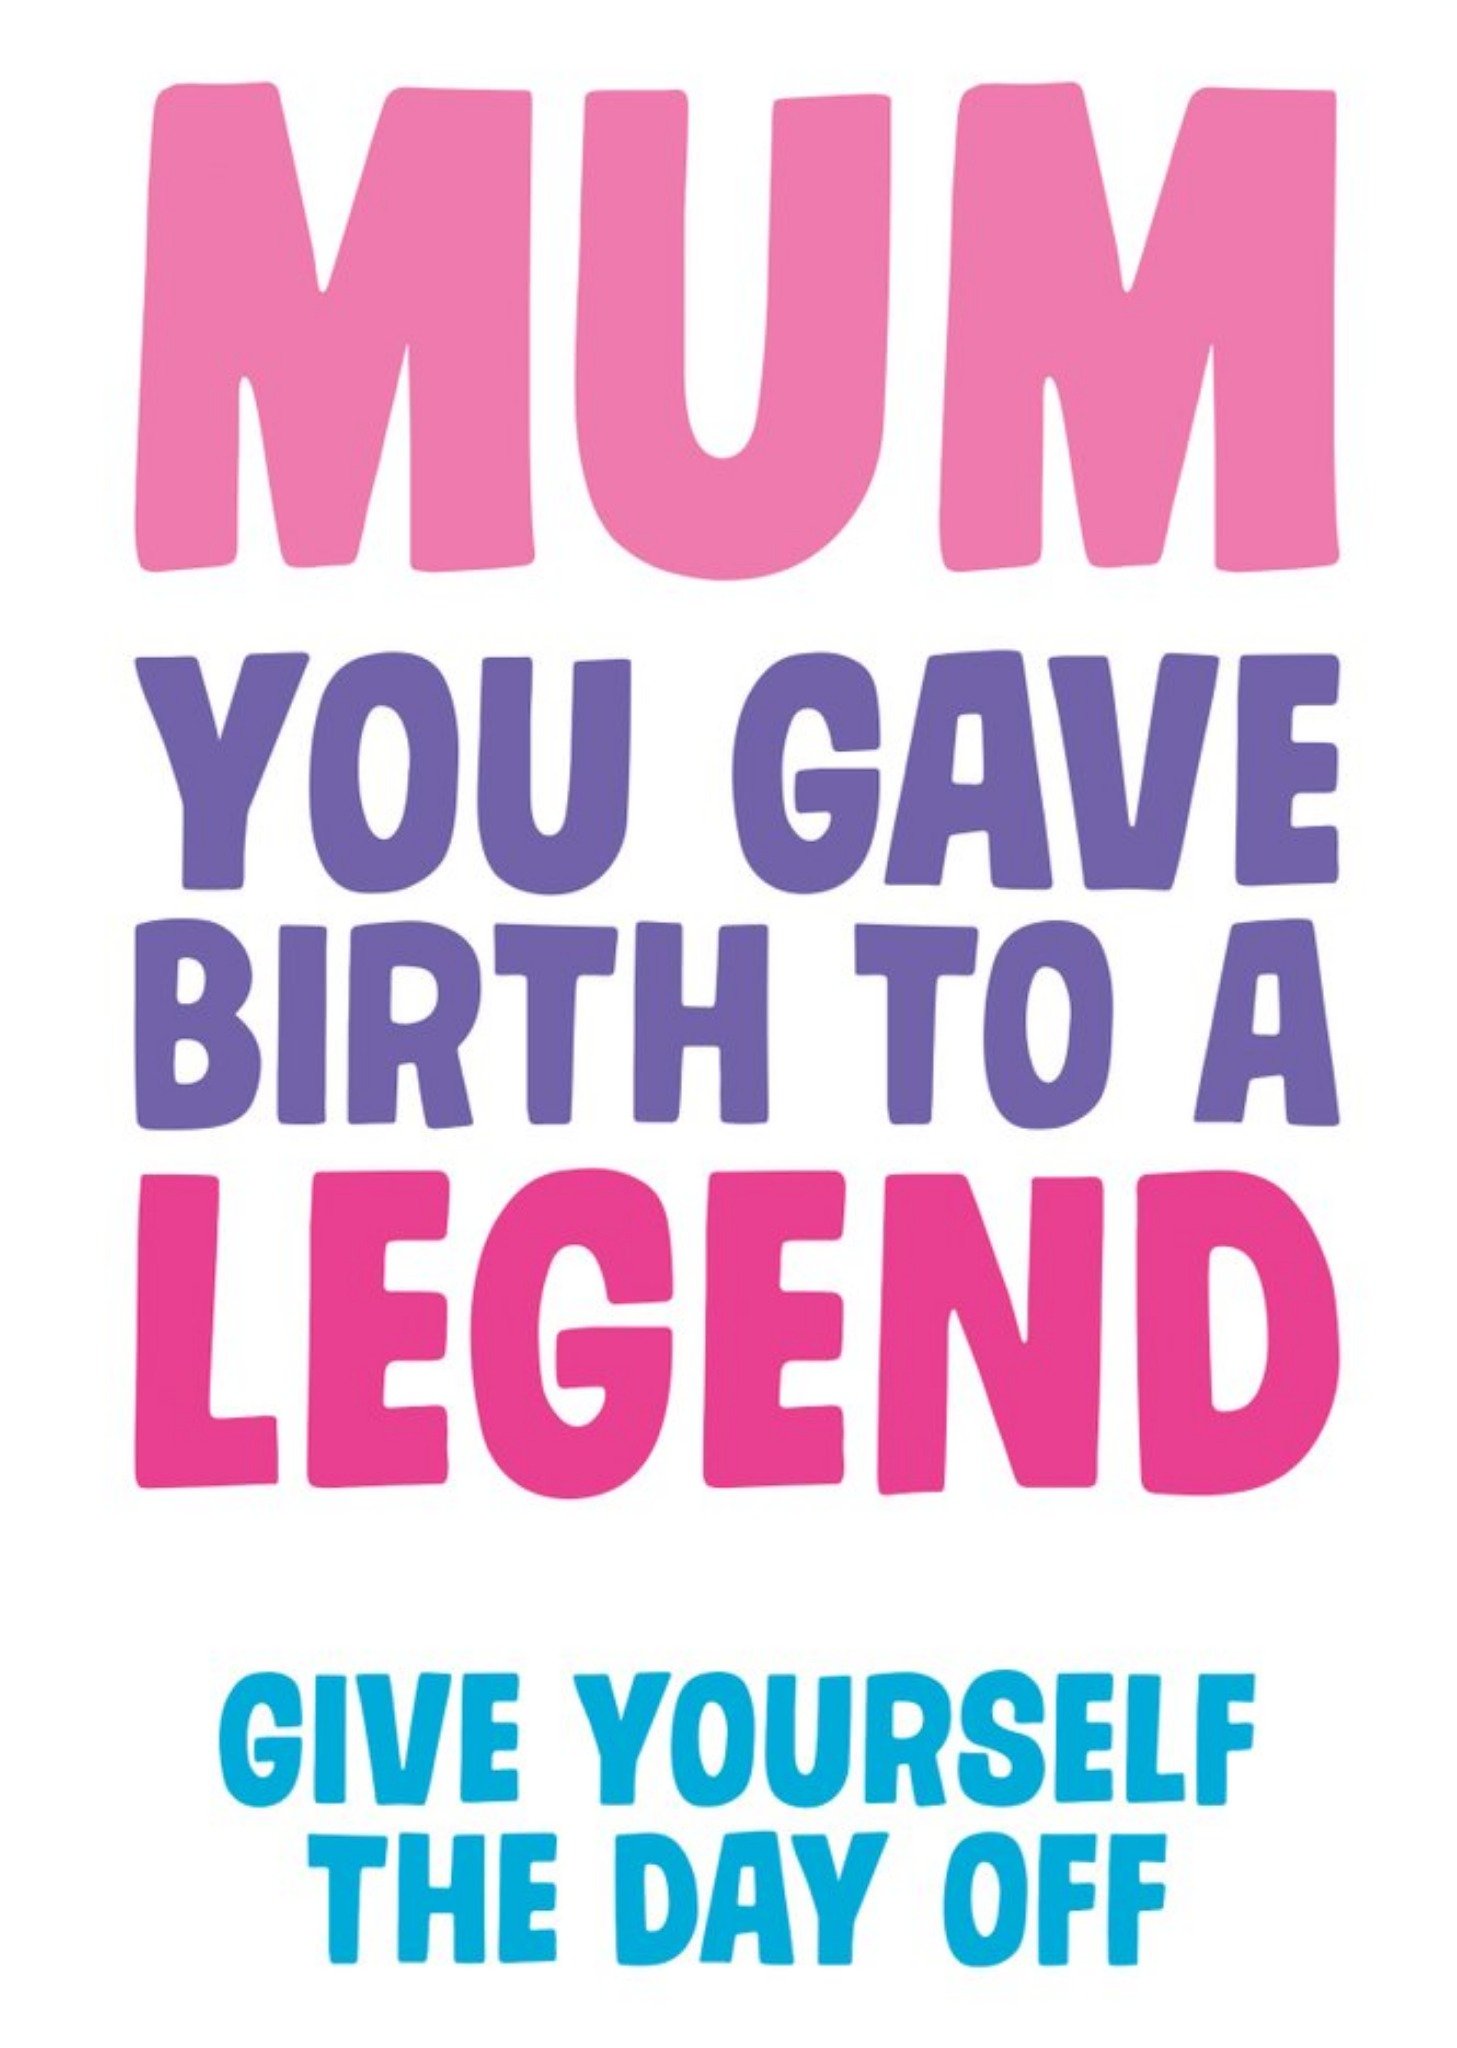 Moonpig Dean Morris Gave Birth To A Legend Mother's Day Card Ecard